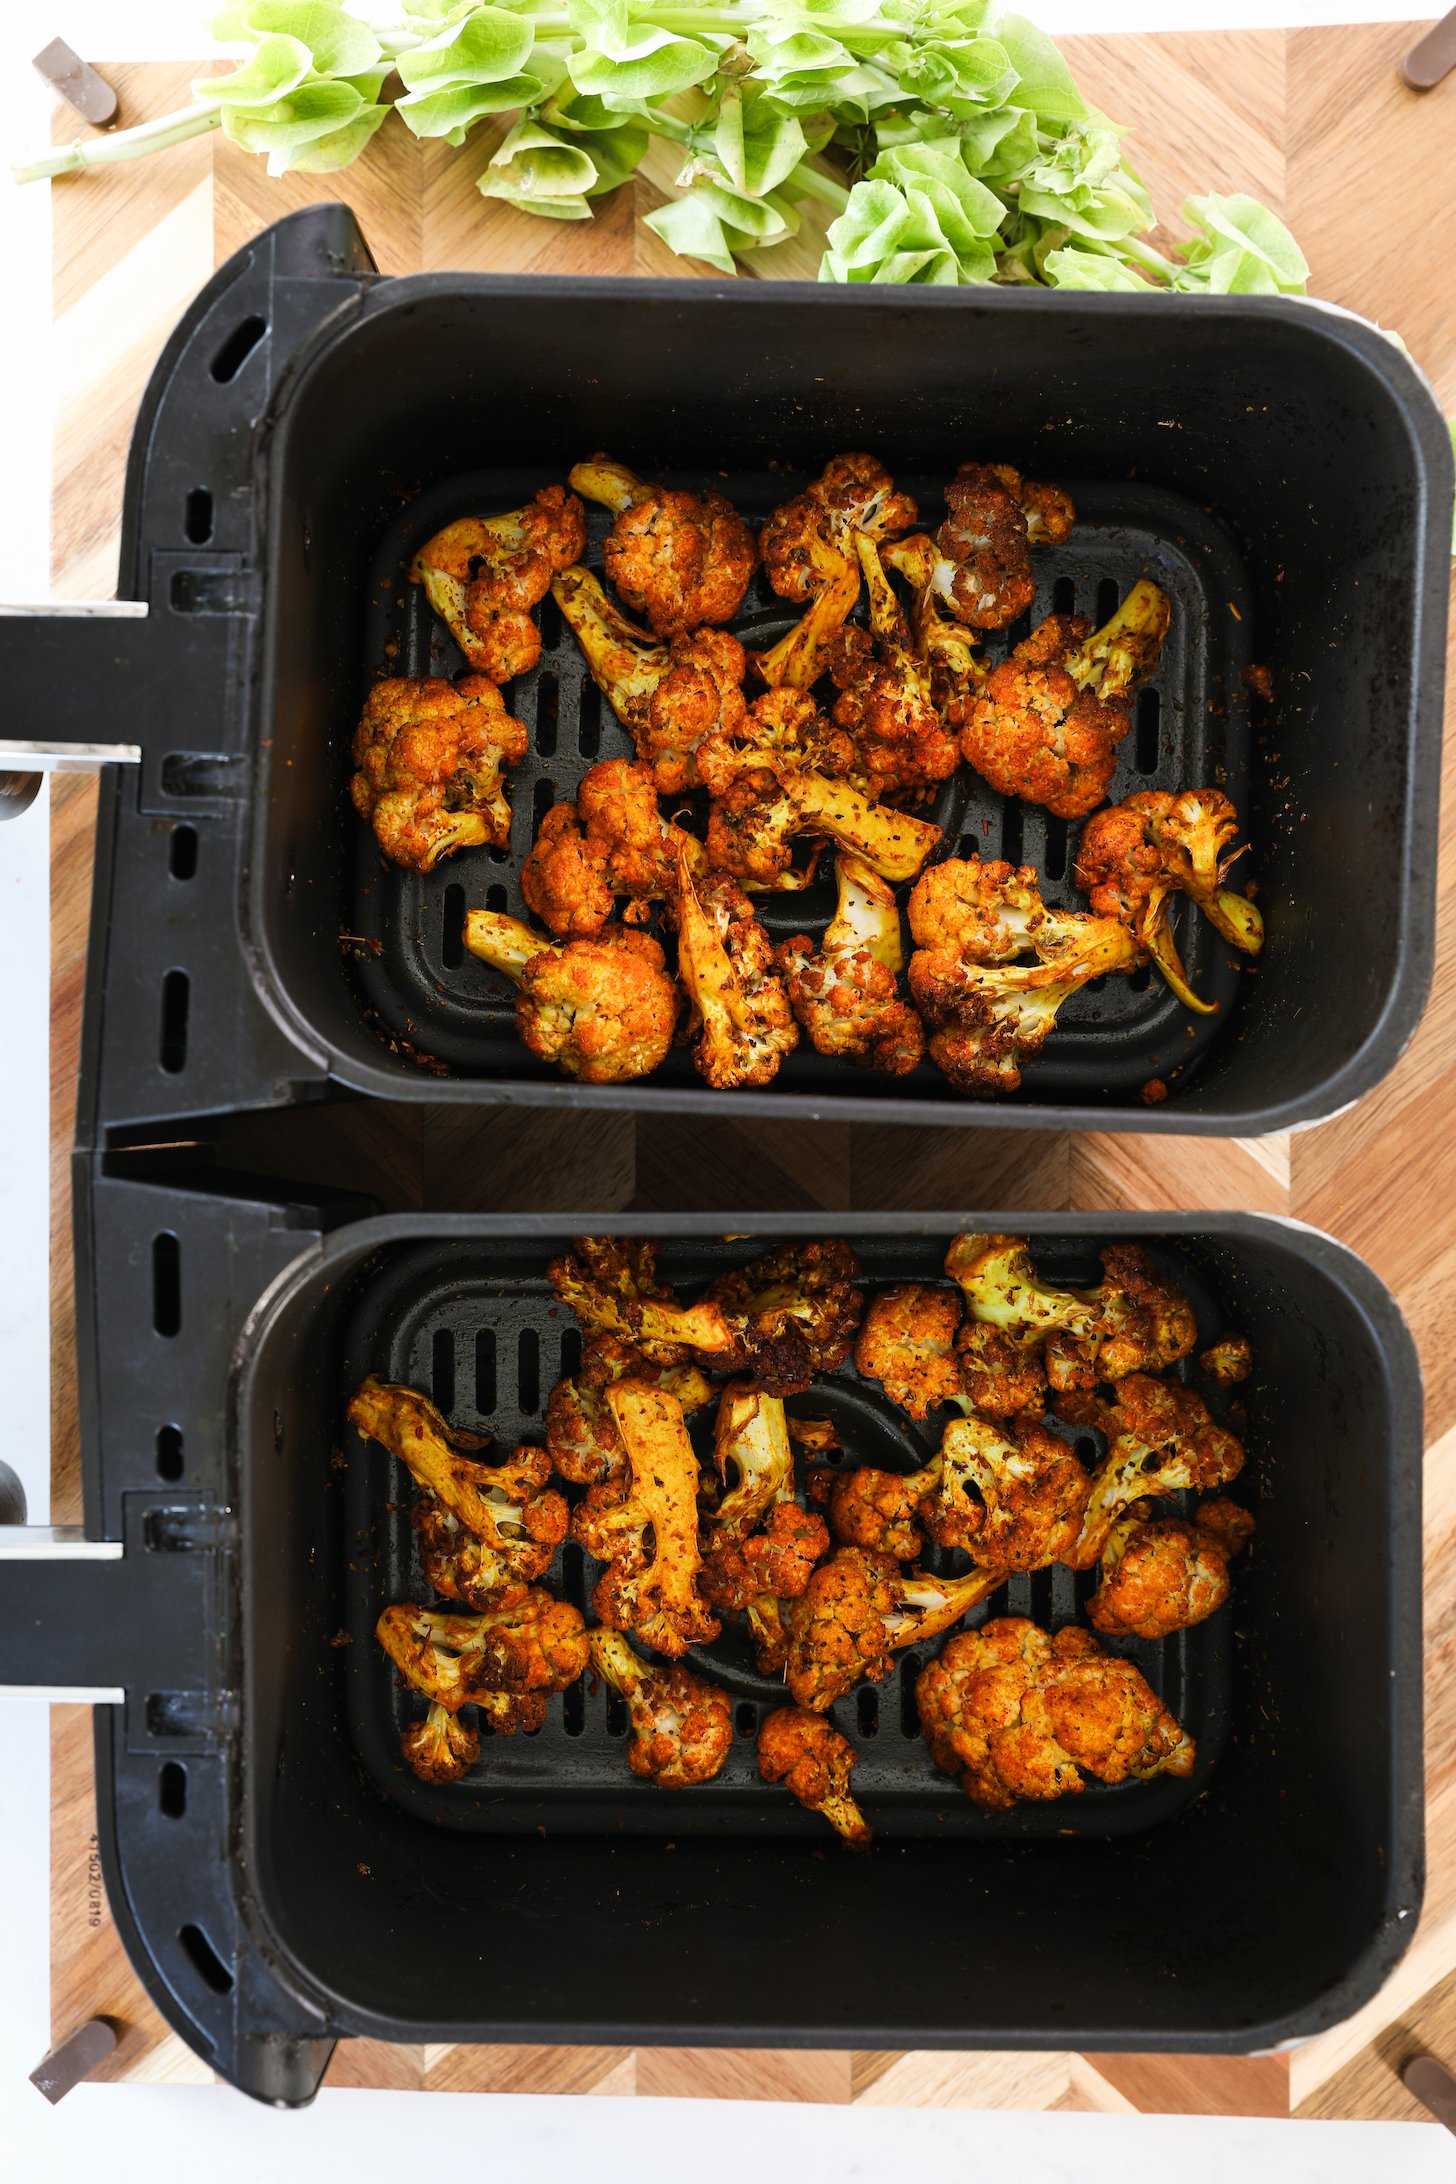 Two air fryer baskets of spice-coated cooked cauliflower bites.